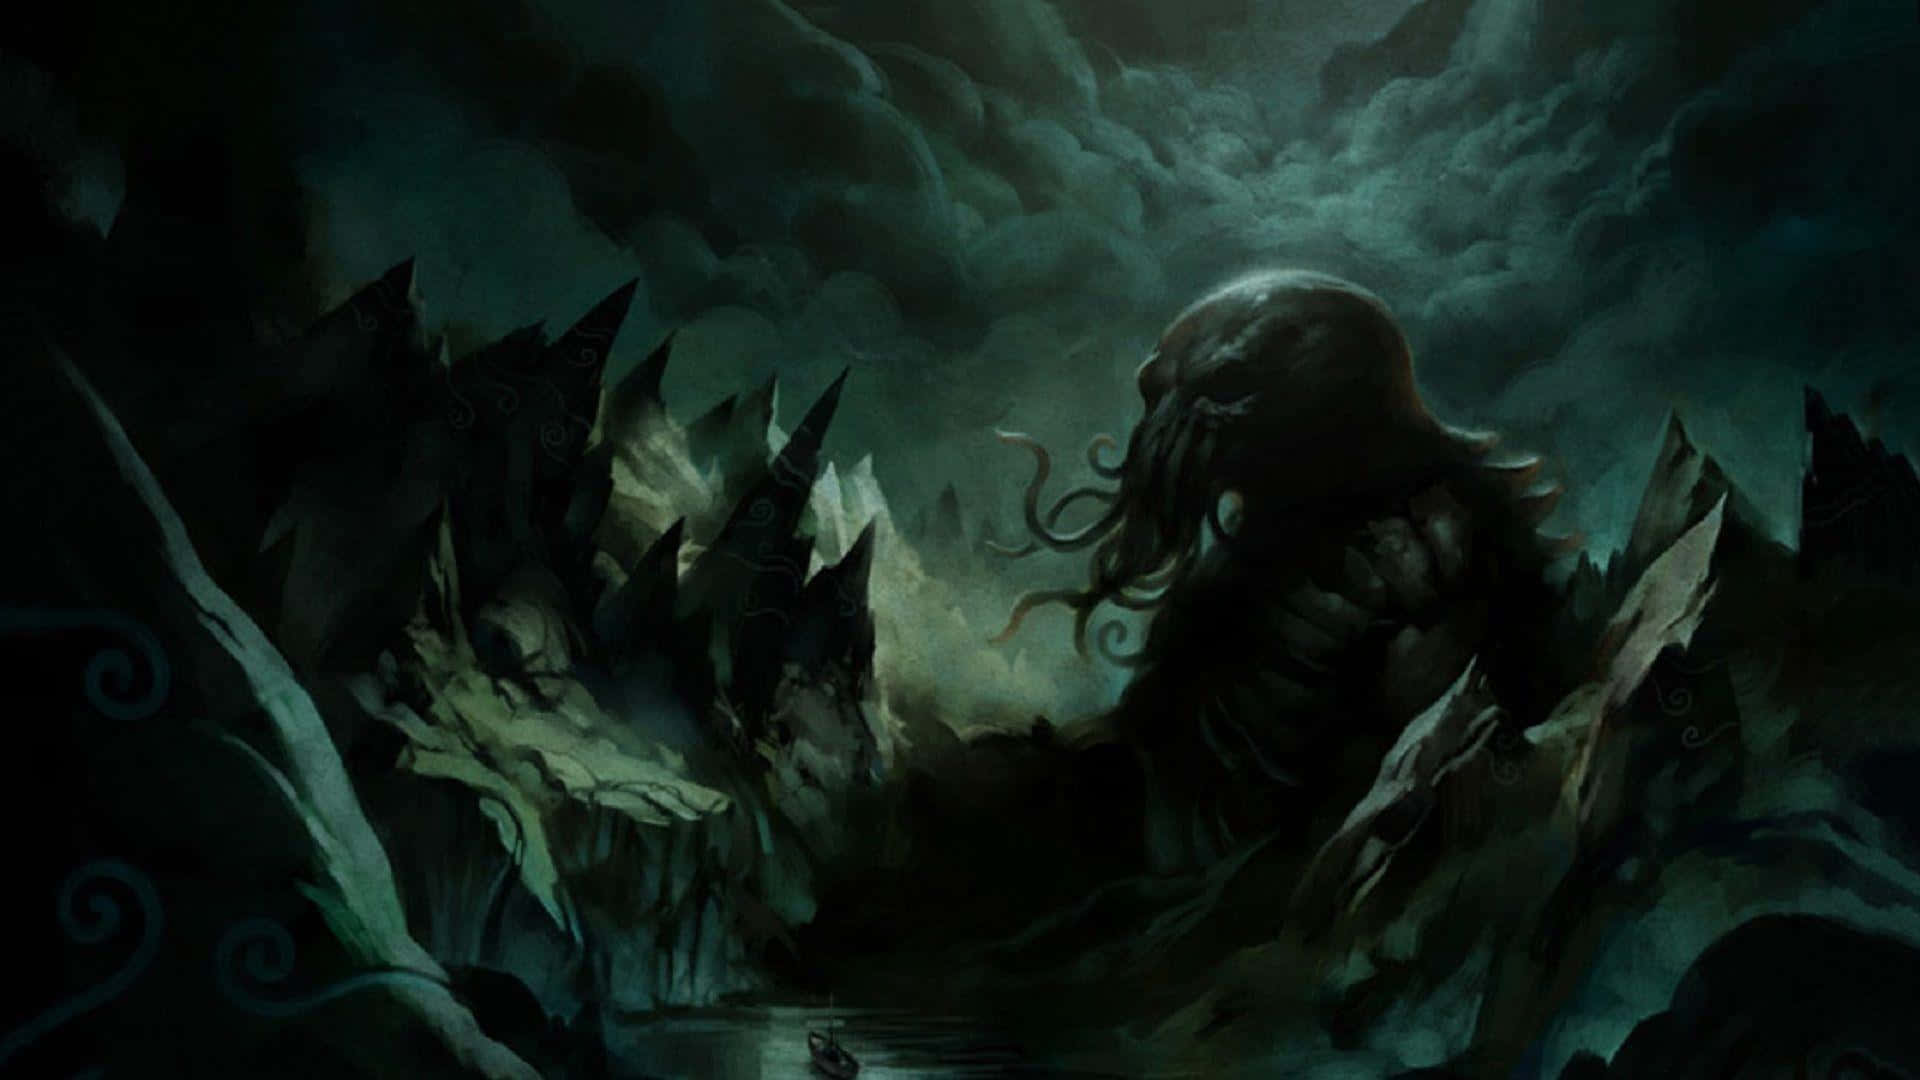 A close up of Cthulhu, a monstrous creature of the night